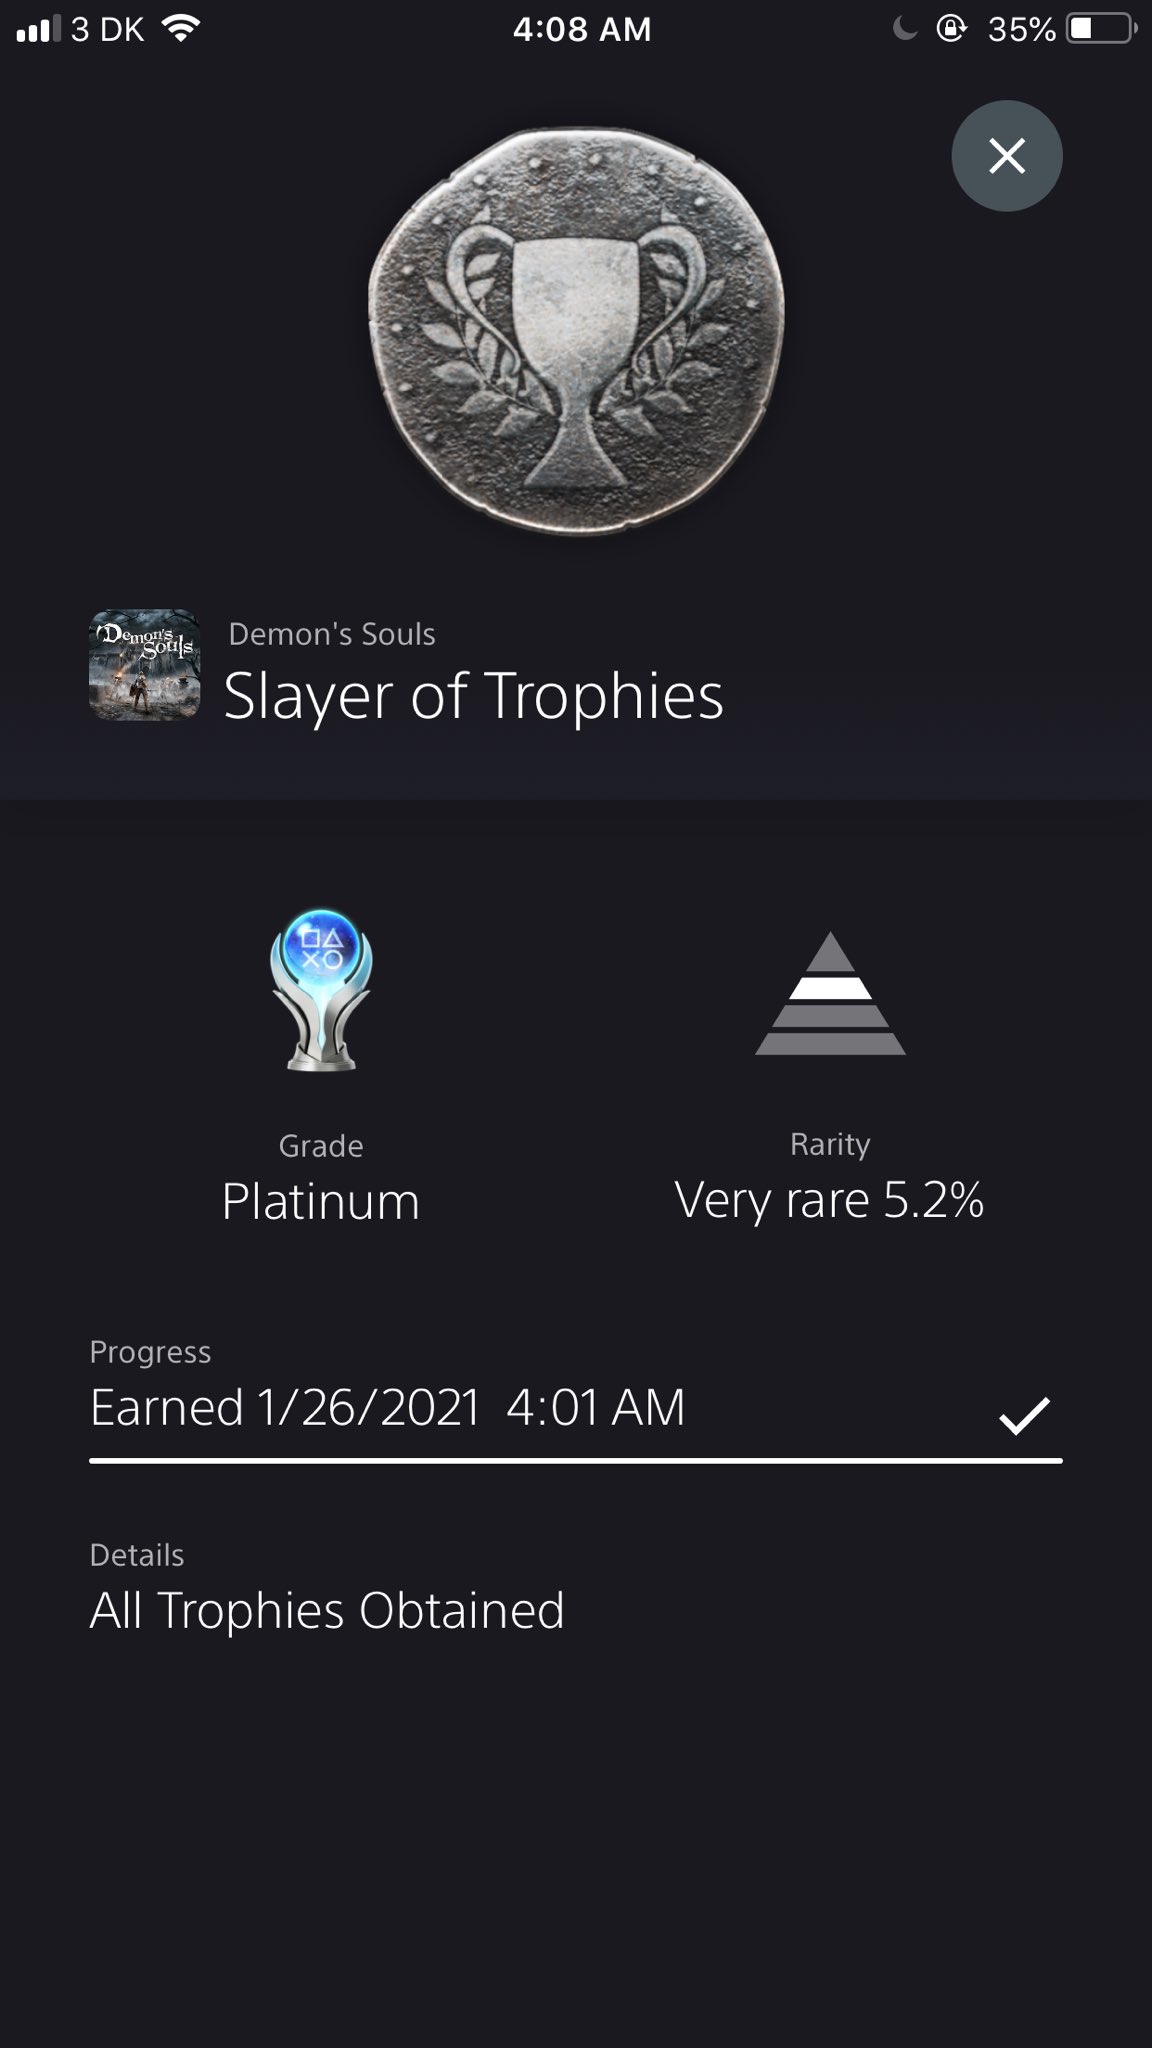 Dishonored Trophies